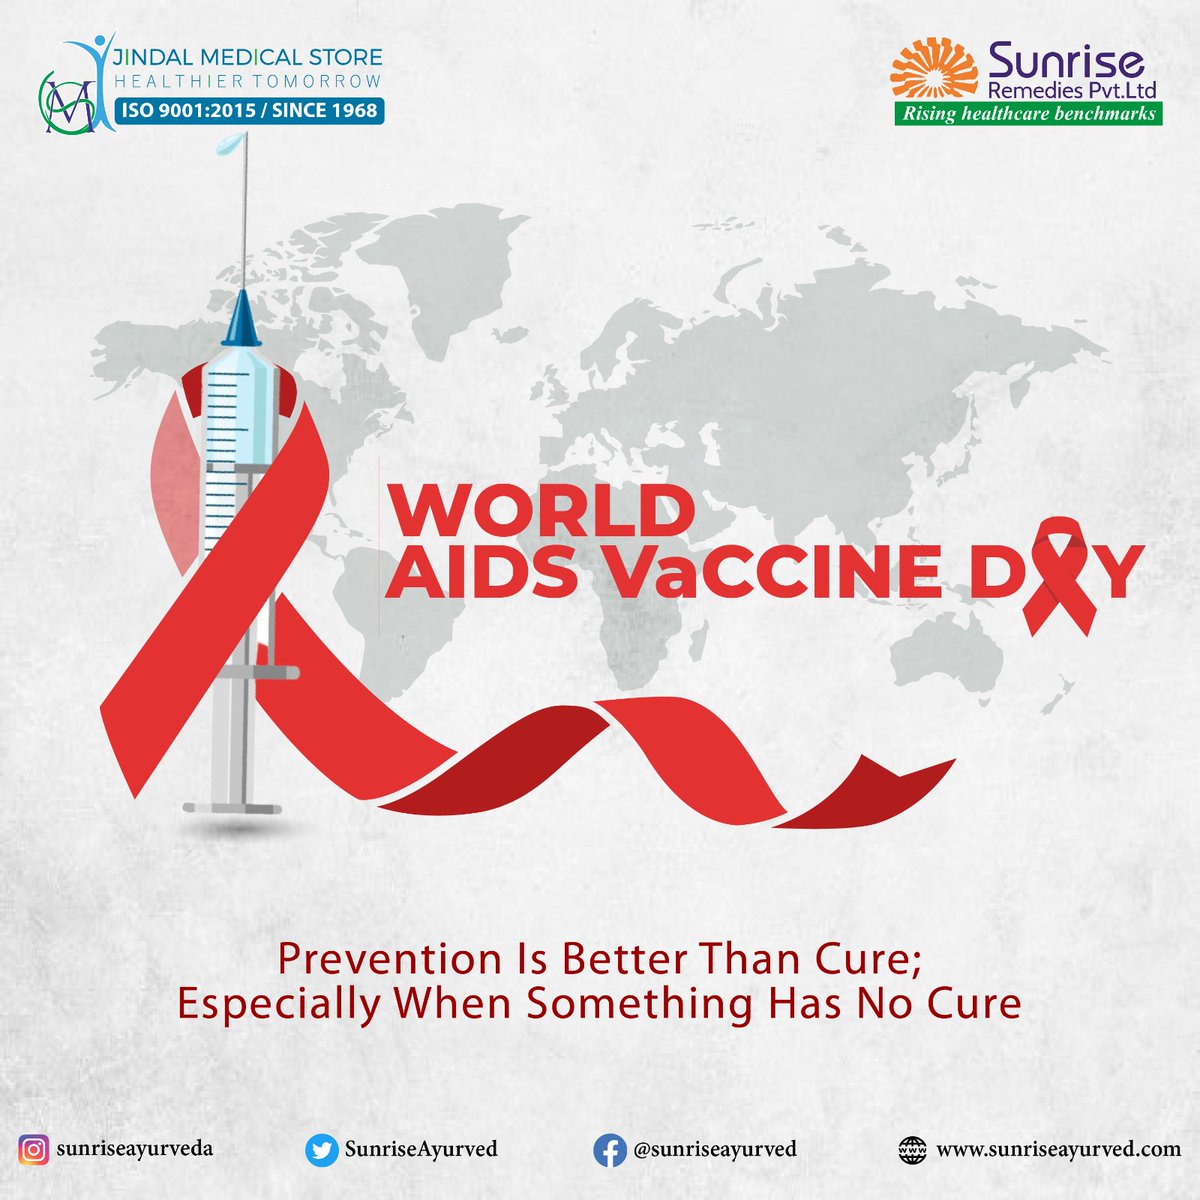 🌍 Today, we stand together to remember and honor those affected by HIV/AIDS. ❤ Let's take action and ensure they receive the care, support, and love they deserve. 

#WorldAIDSVaccineDay #EndHIVAIDS #SunriseAyurveda #JindalMedicalstore